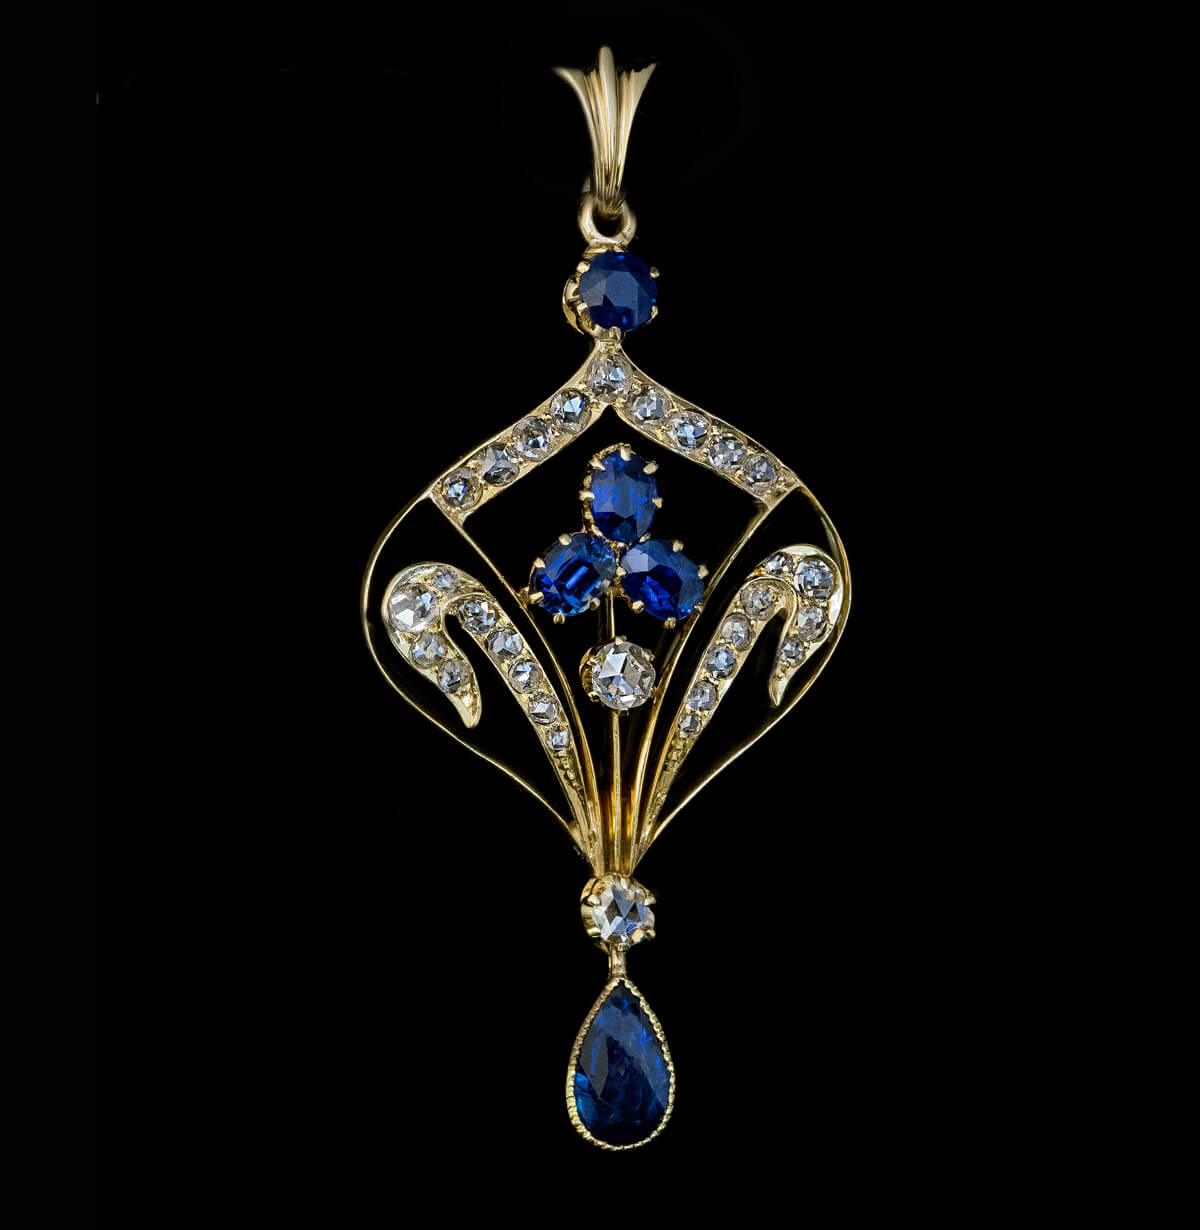 Our kind of blue : Fabulous antique sapphire necklace #thejewelgallery  #belleepoquejewelry #victorianchic | Blue sapphire jewelry, Beautiful  necklaces, Jewelry